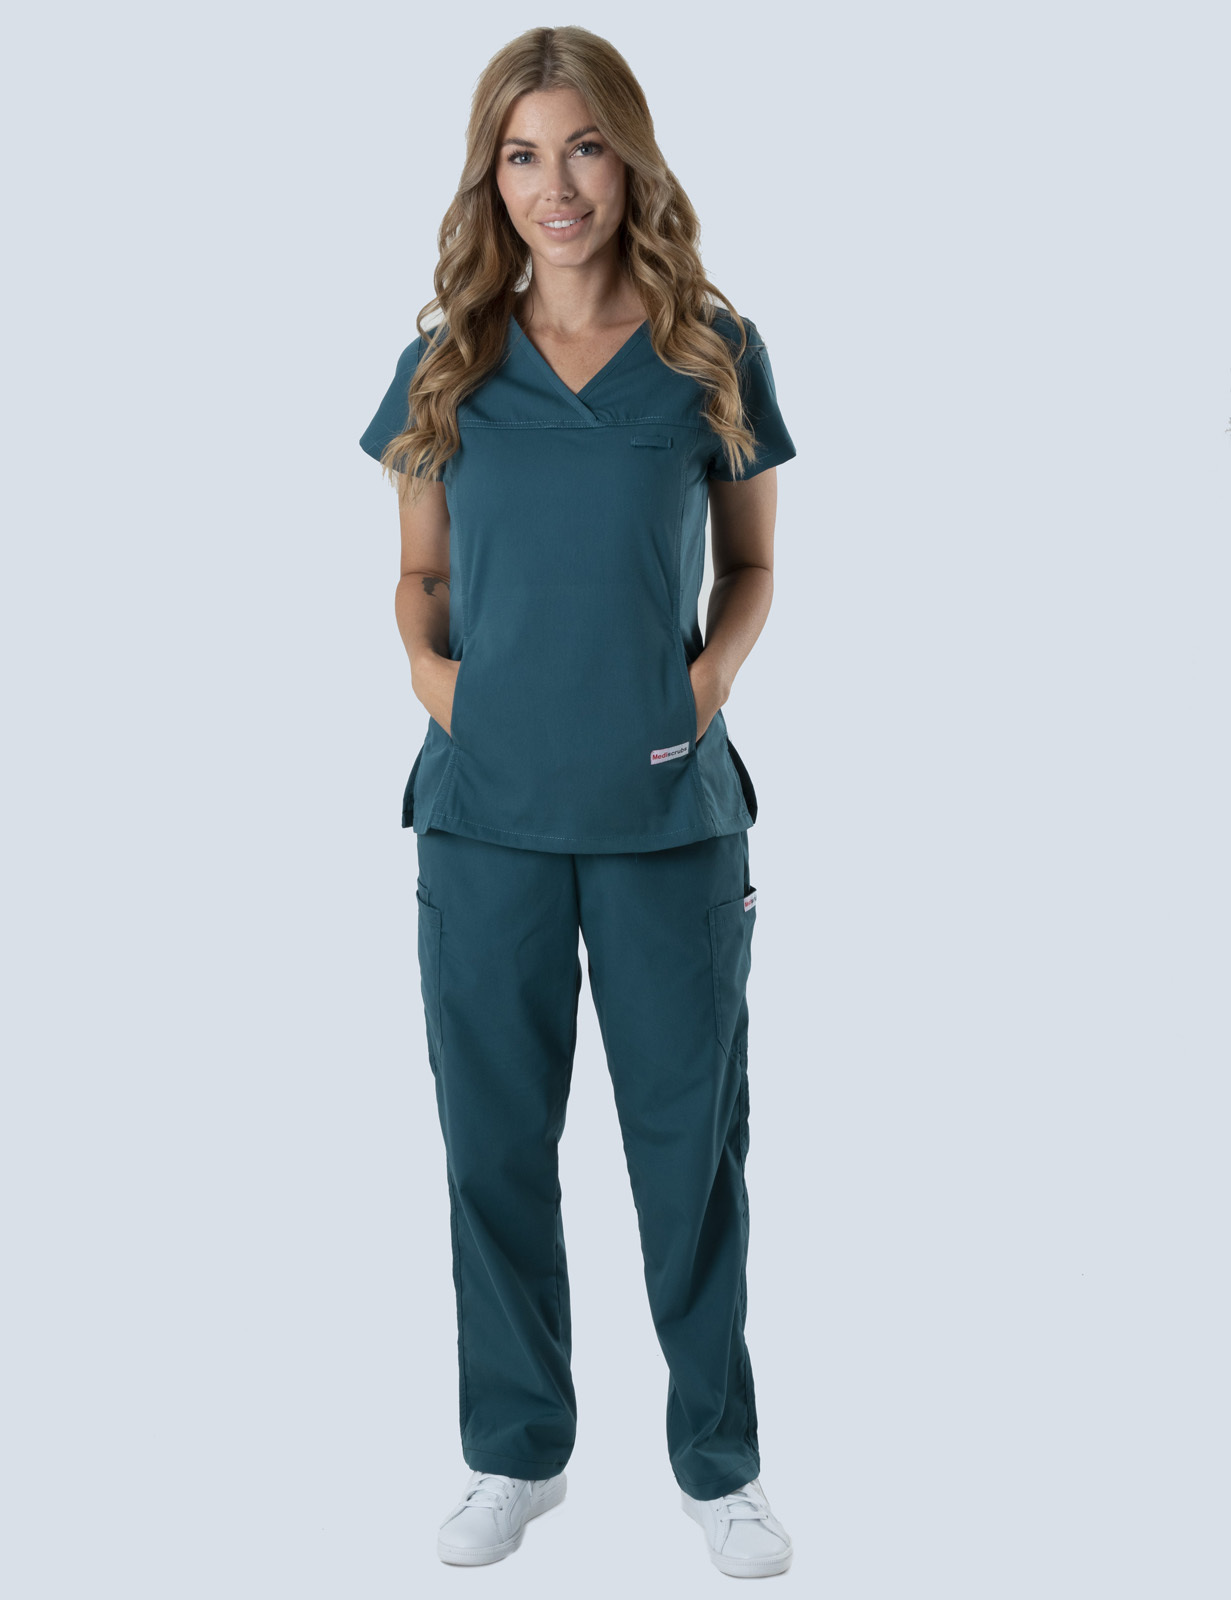 Flinders Medical Centre - Registered Nurse (Women's Fit Solid Scrub Top and Cargo Pants in Caribbean incl Logos)